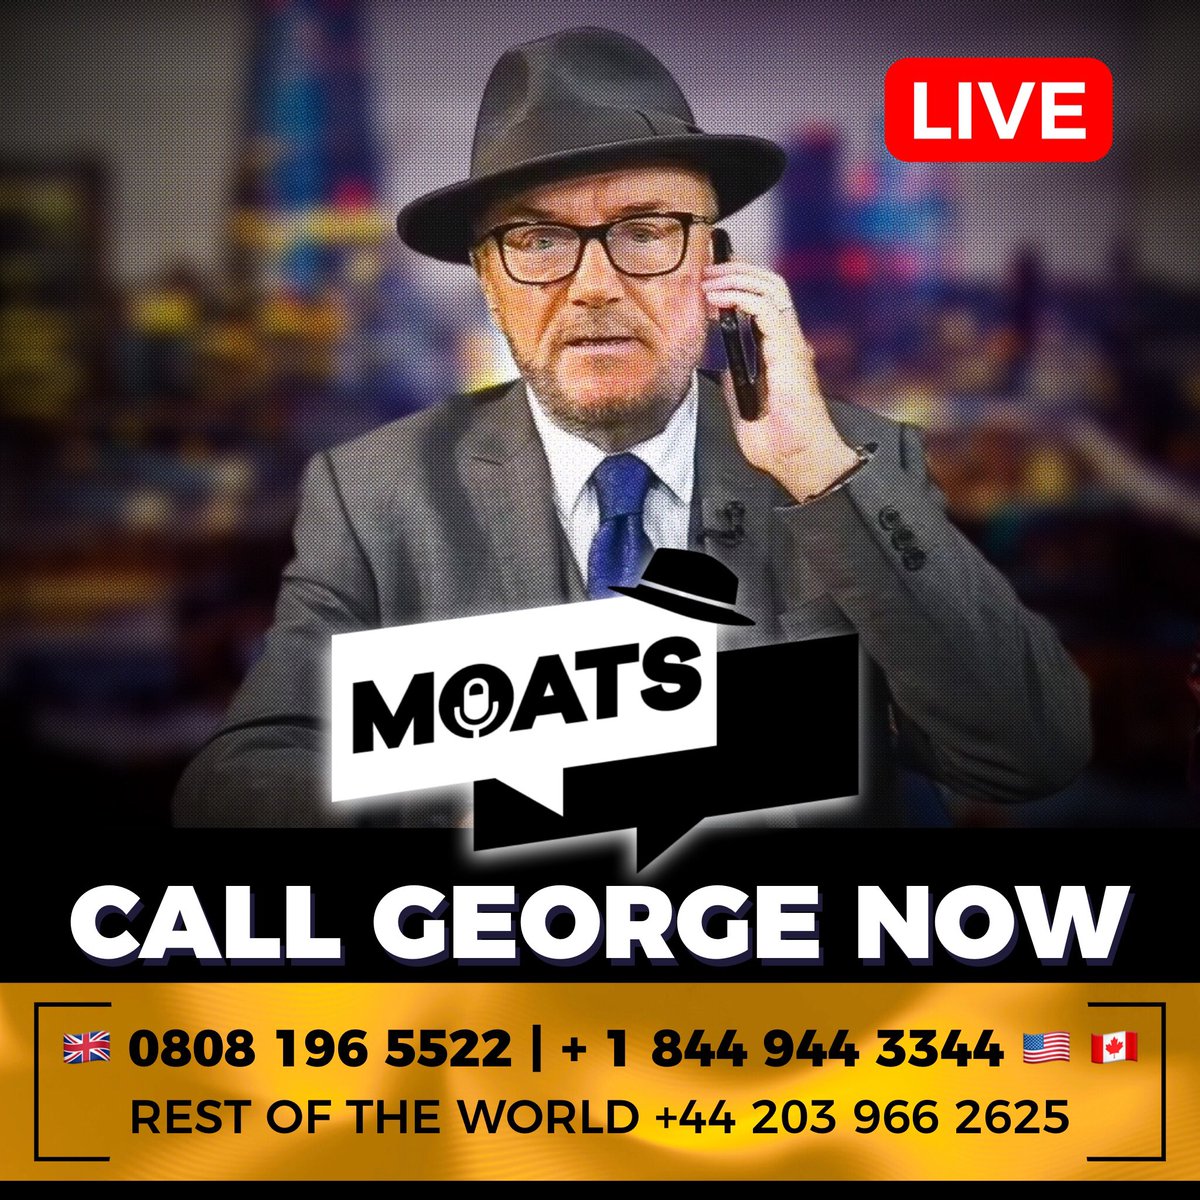 🚨🚨#LIVE The Mother Of All Talk Shows is ON AIR now! Call #MOATS TOLL FREE worldwide! 🇬🇧 🇮🇪 0808 196 5522 🇺🇸 🇨🇦 +1 844 944 3344 🌎 +44 203 966 2625 🟥 youtube.com/live/wj-YrMOhc… 🟩 rumble.com/v4rvwi5-moats-…